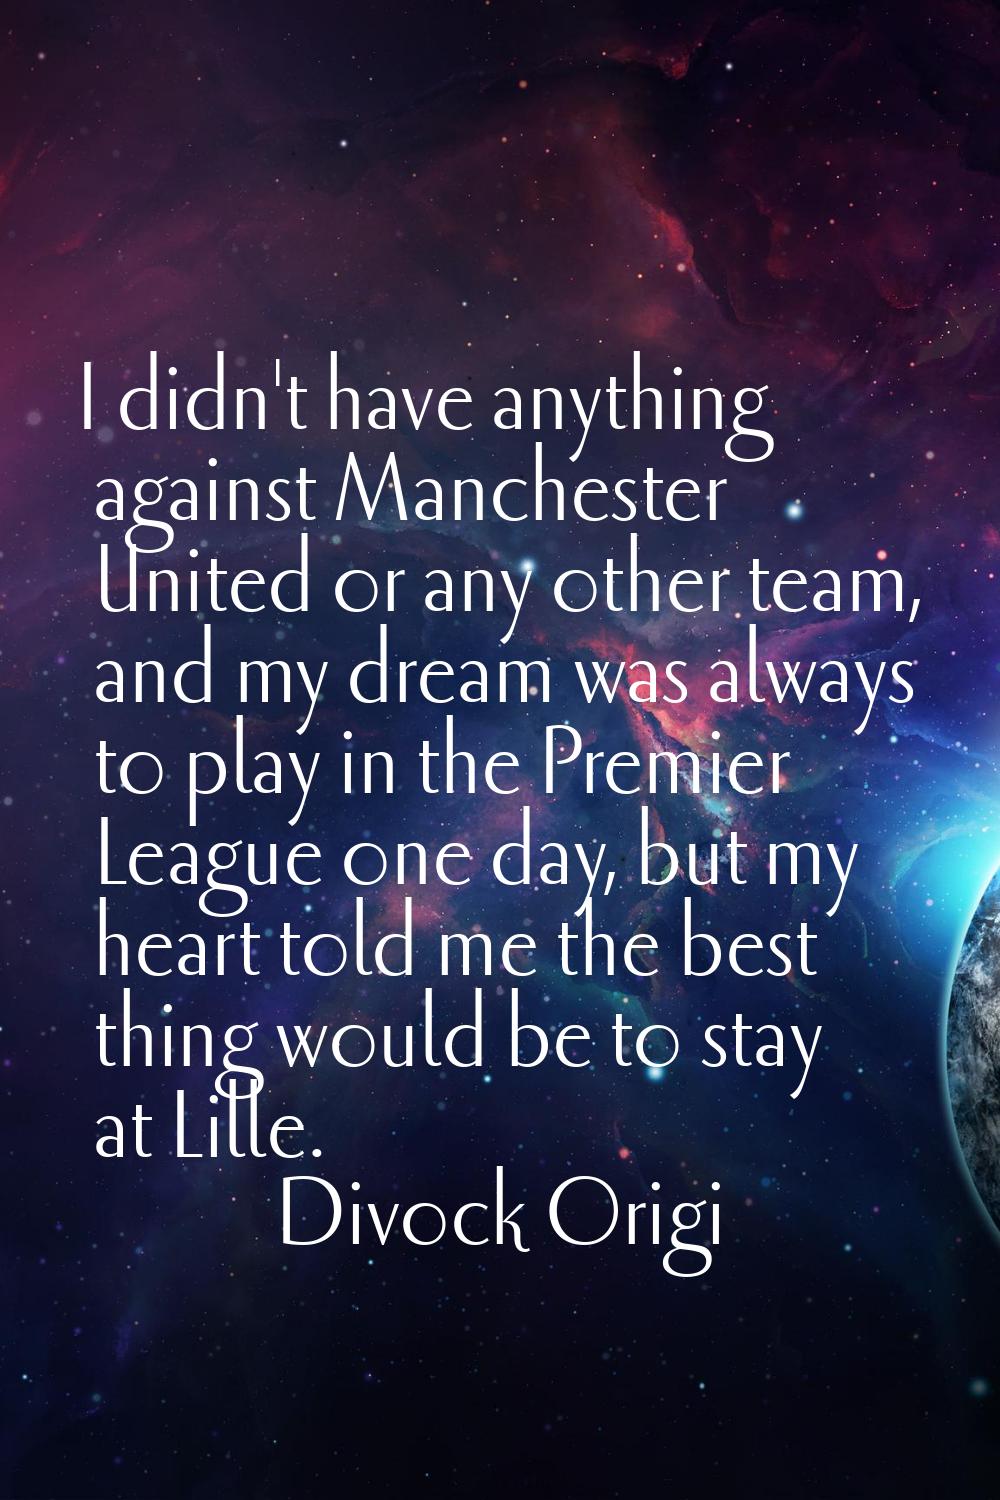 I didn't have anything against Manchester United or any other team, and my dream was always to play